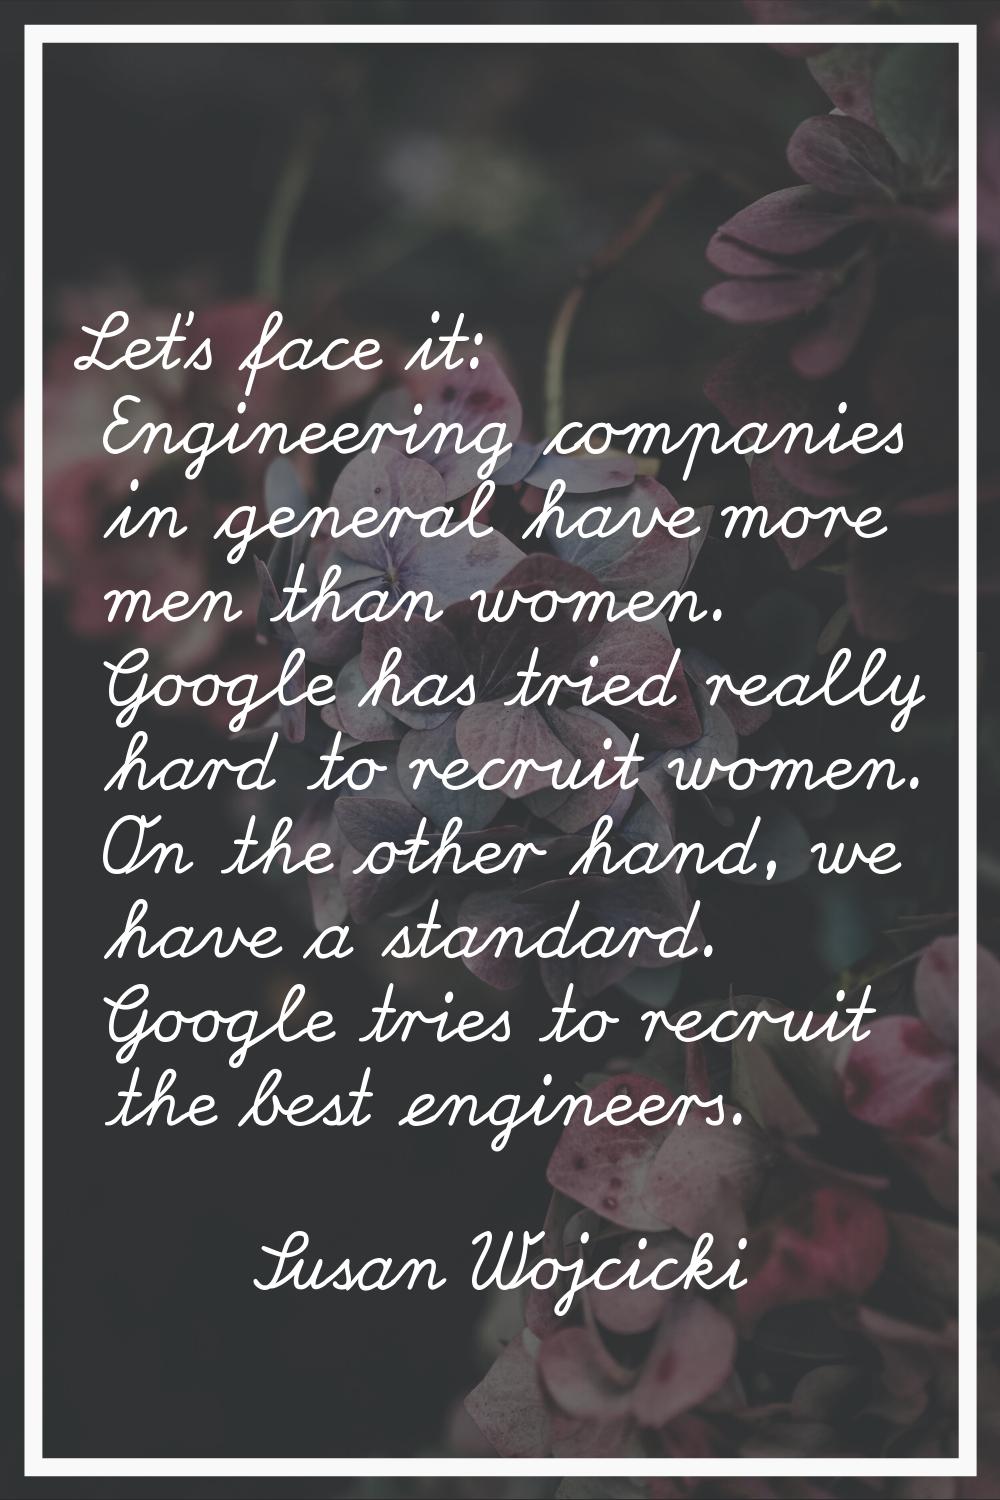 Let's face it: Engineering companies in general have more men than women. Google has tried really h